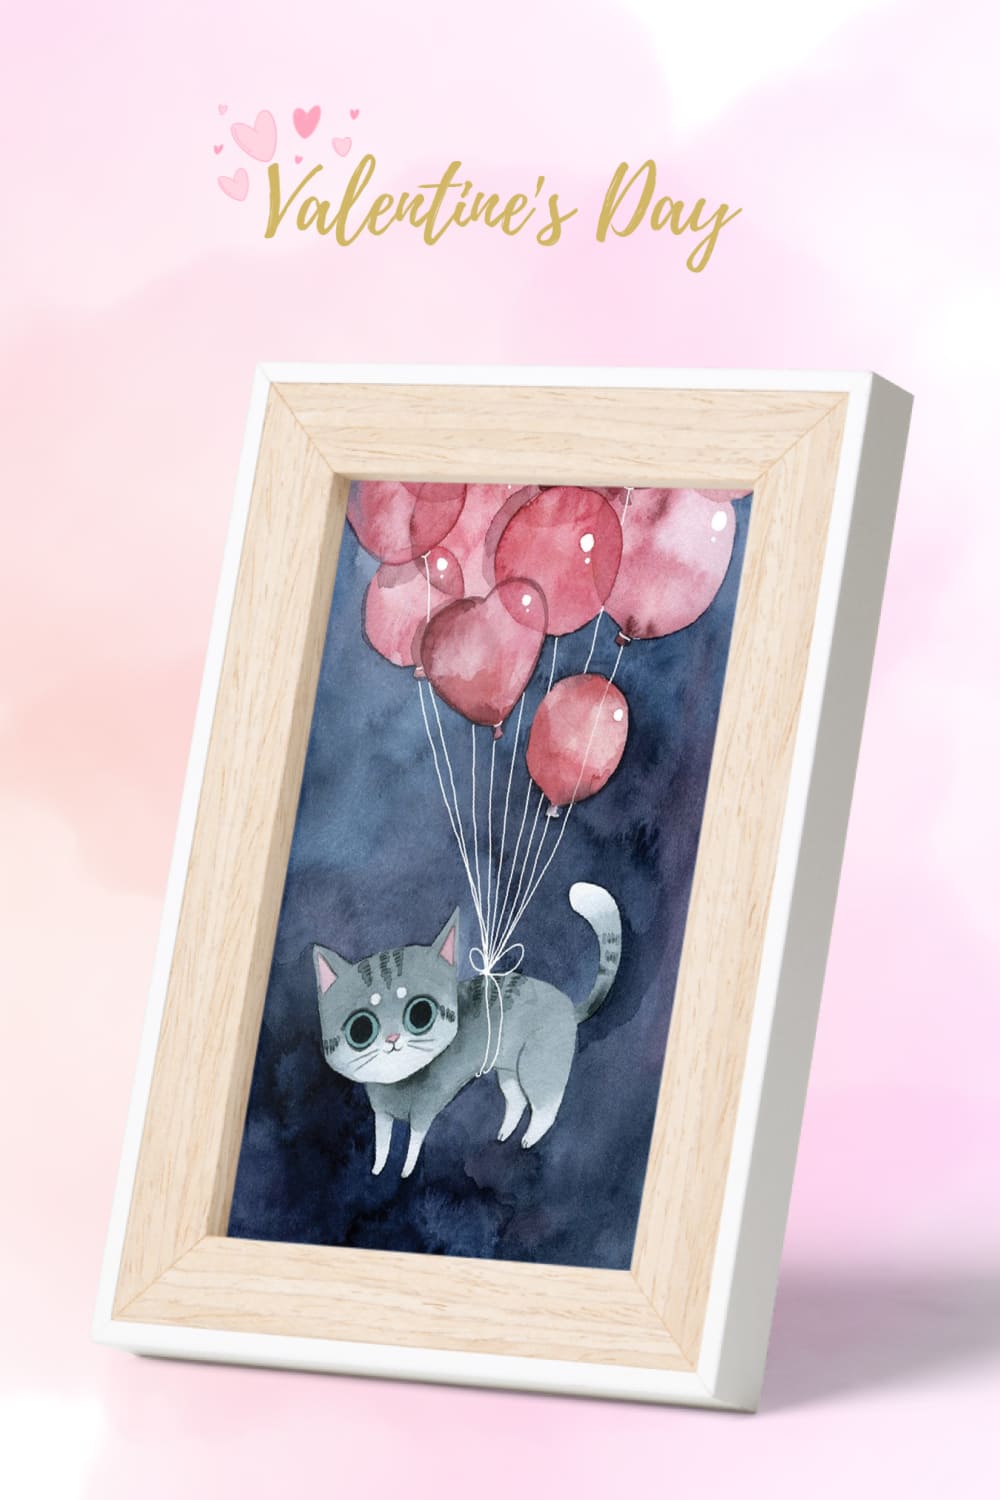 Watercolor Cats. Valentine's Day set - frame preview for pinterest.